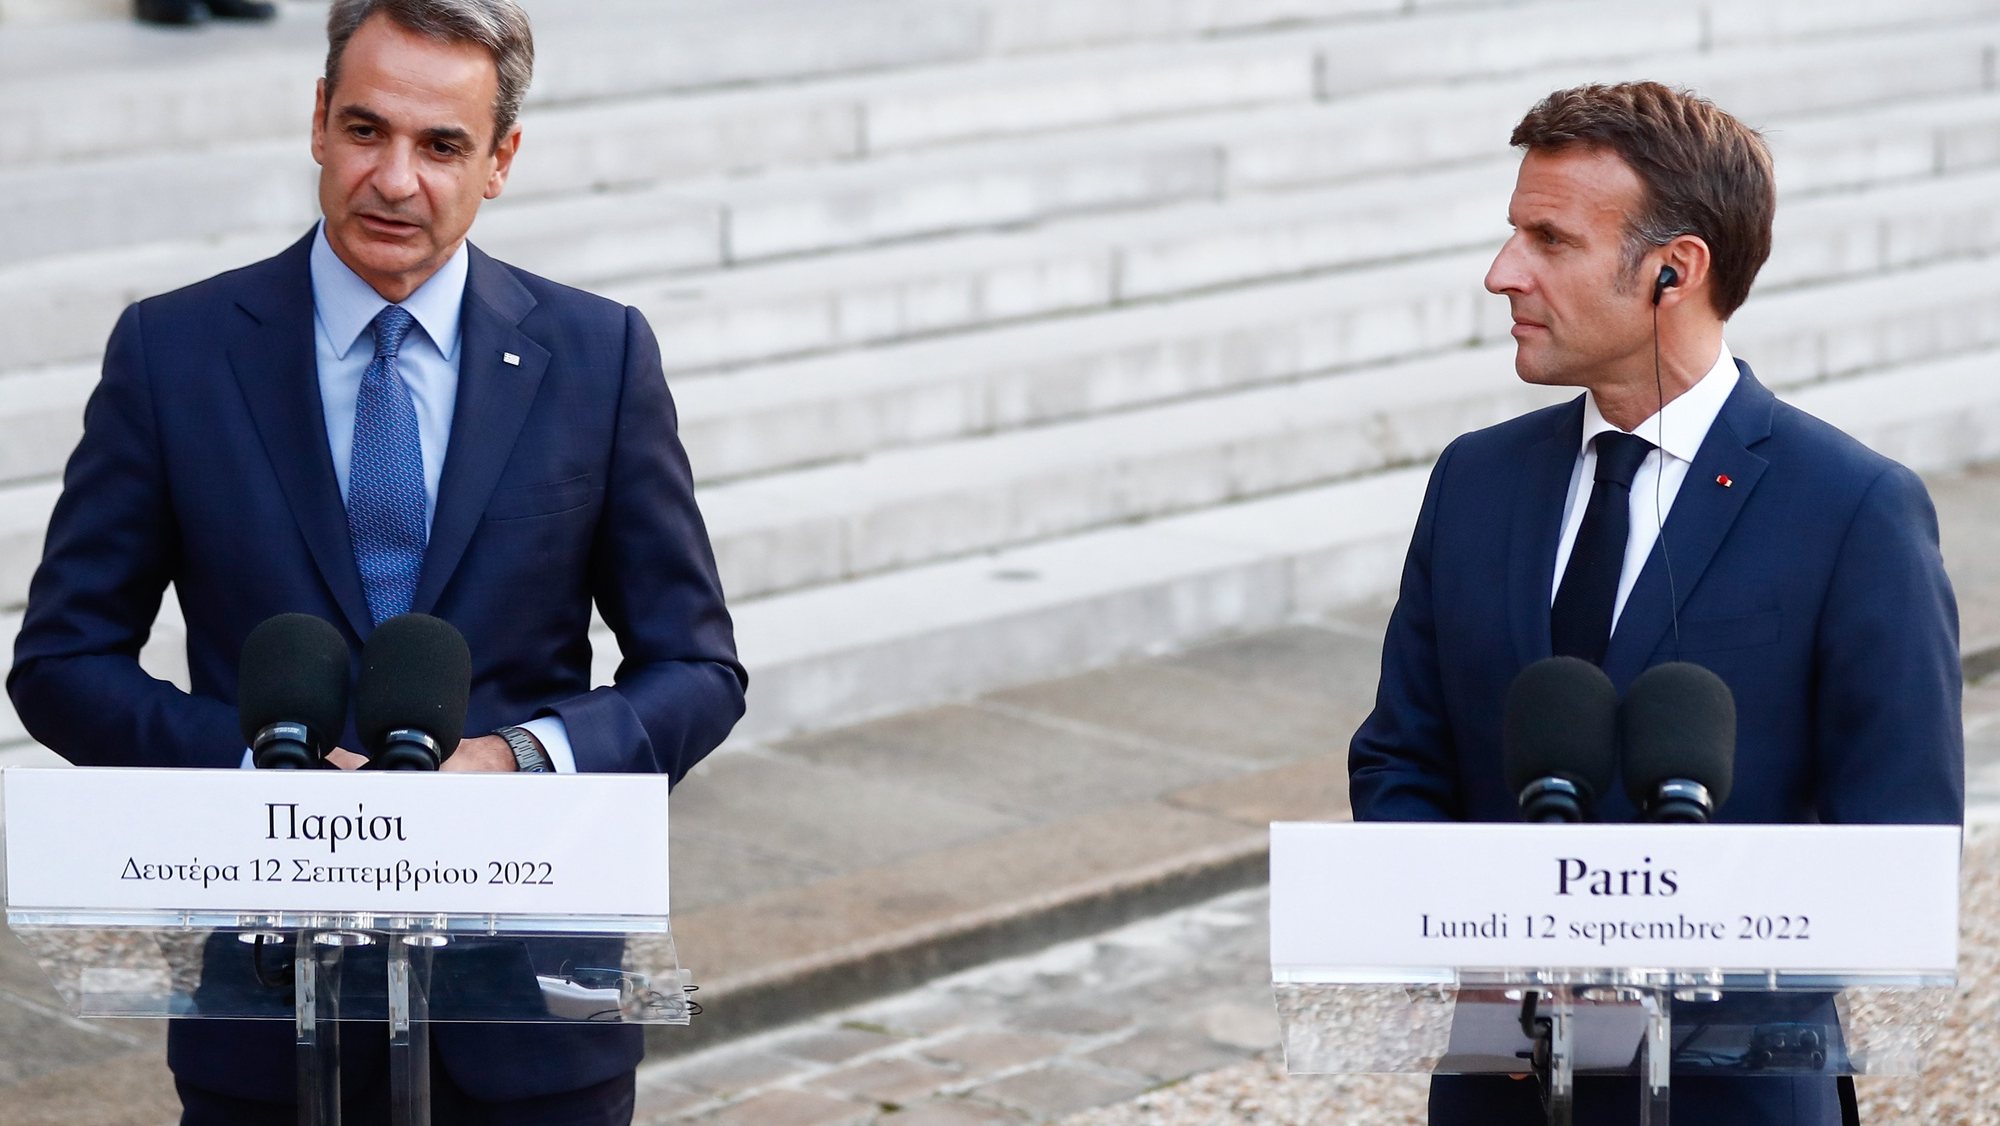 epa10180302 Greek Prime Minister Kyriakos Mitsotakis (L) and French president Emmanuel Macron (R), attend a press conference before their meeting at the Elysee Palace in Paris, France, 12 September 2022.  EPA/Mohammed Badra